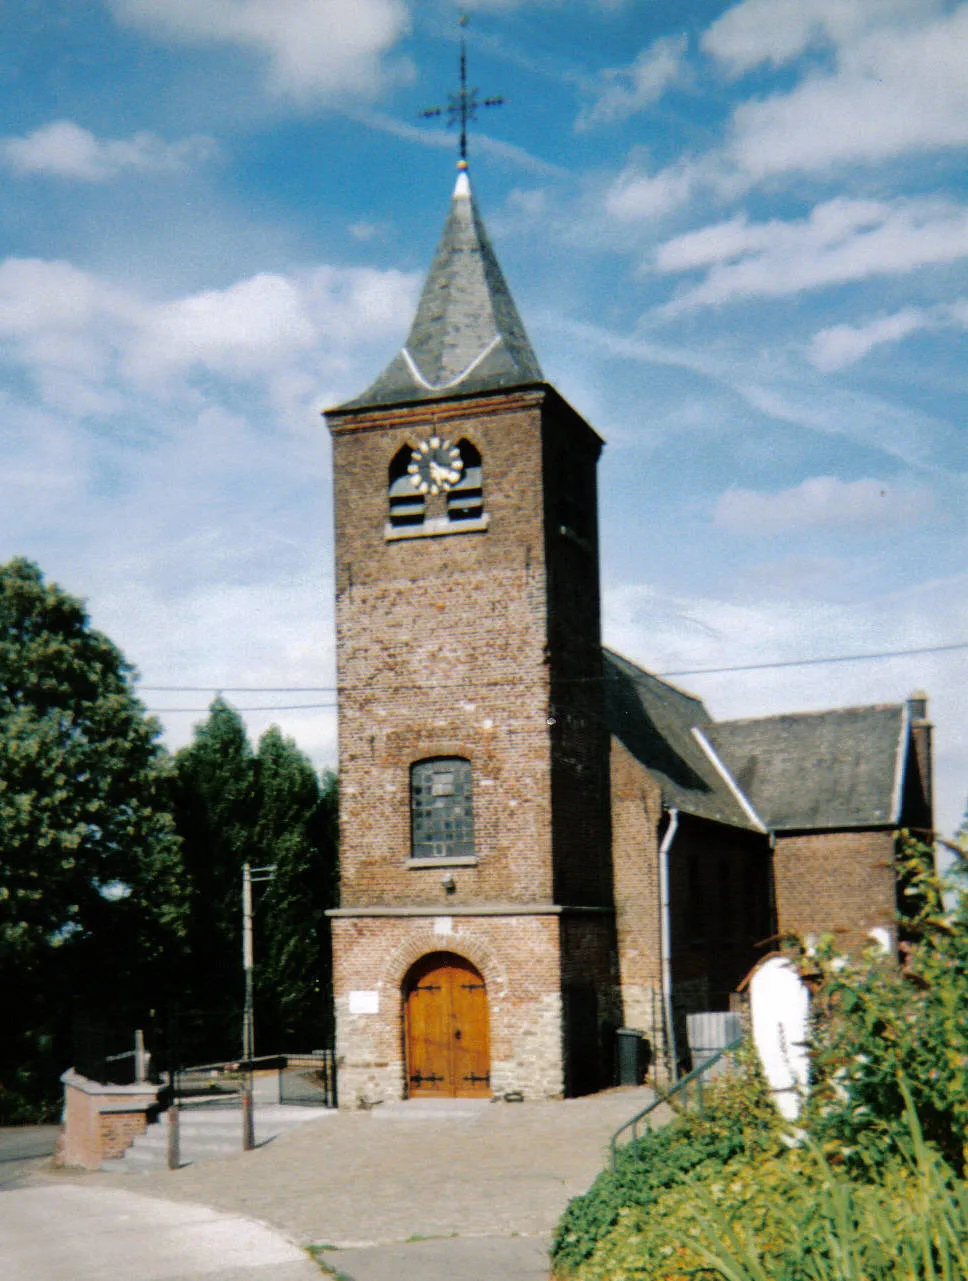 Photo showing: The village church of Kerkem. The hamlet of Kerkem, together with Maarke, constitutes the village of Maarke-Kerkem, which is a submunicipality of Maarkedal, Belgium. The above church is St. Peter's.